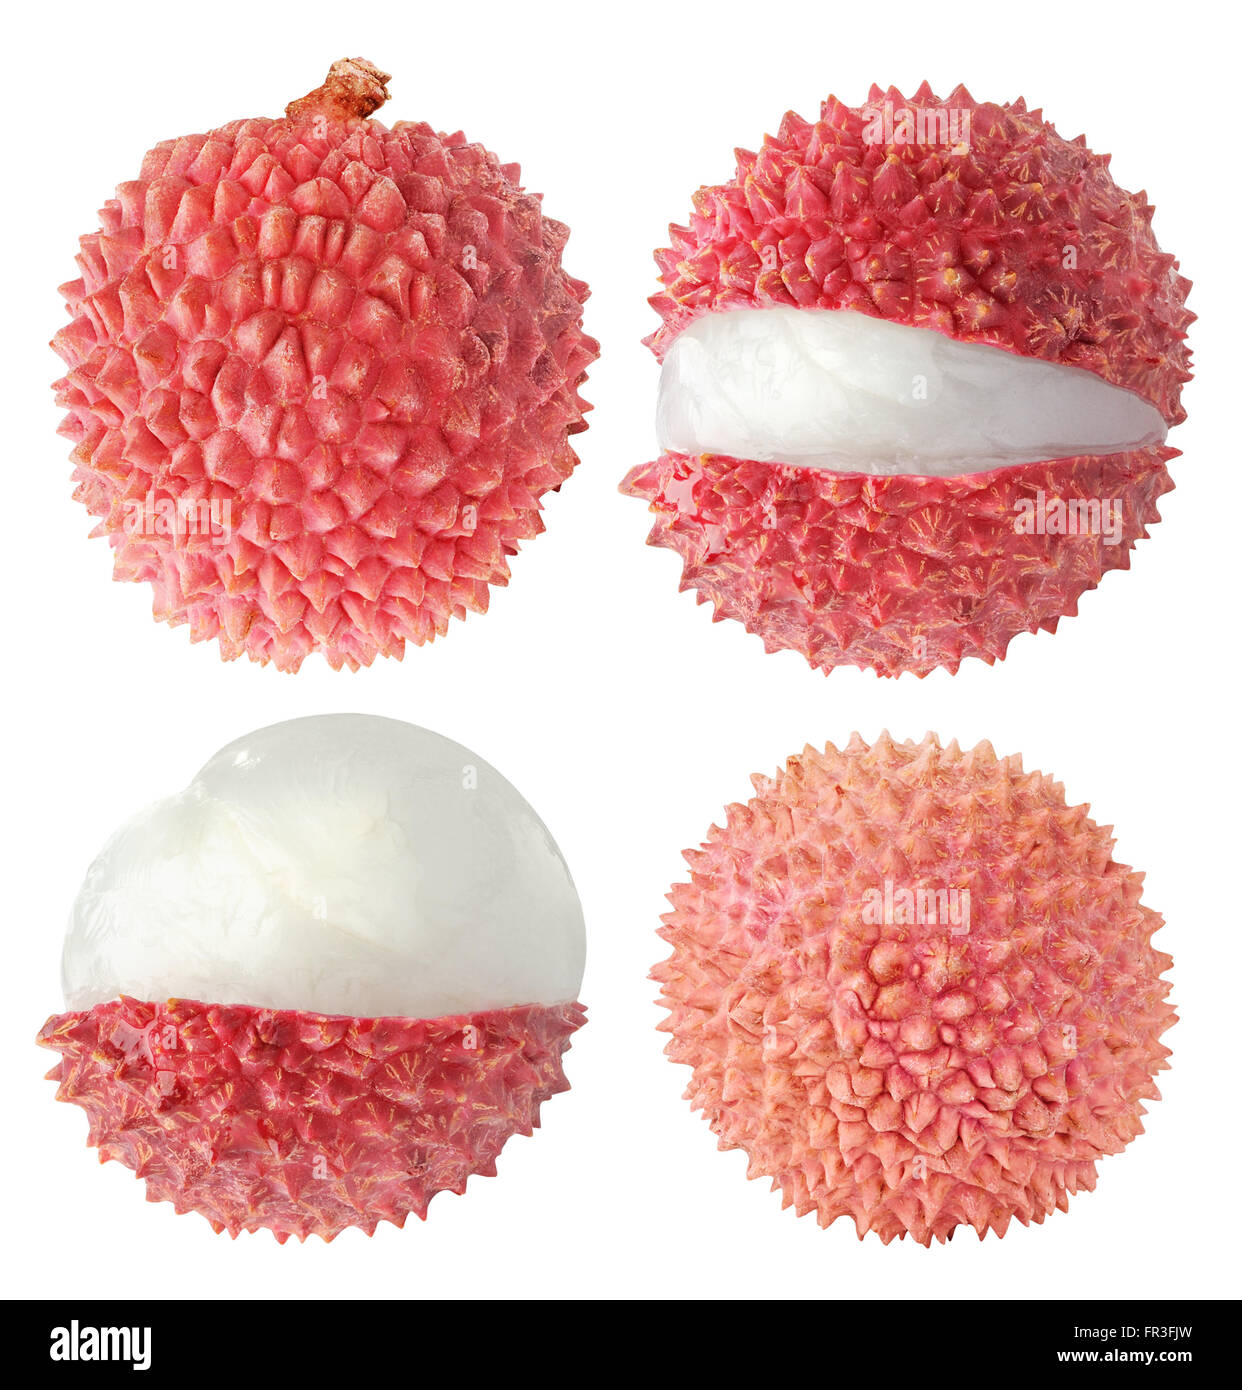 Collection of whole and cut lychee fruits isolated on white with clipping path Stock Photo